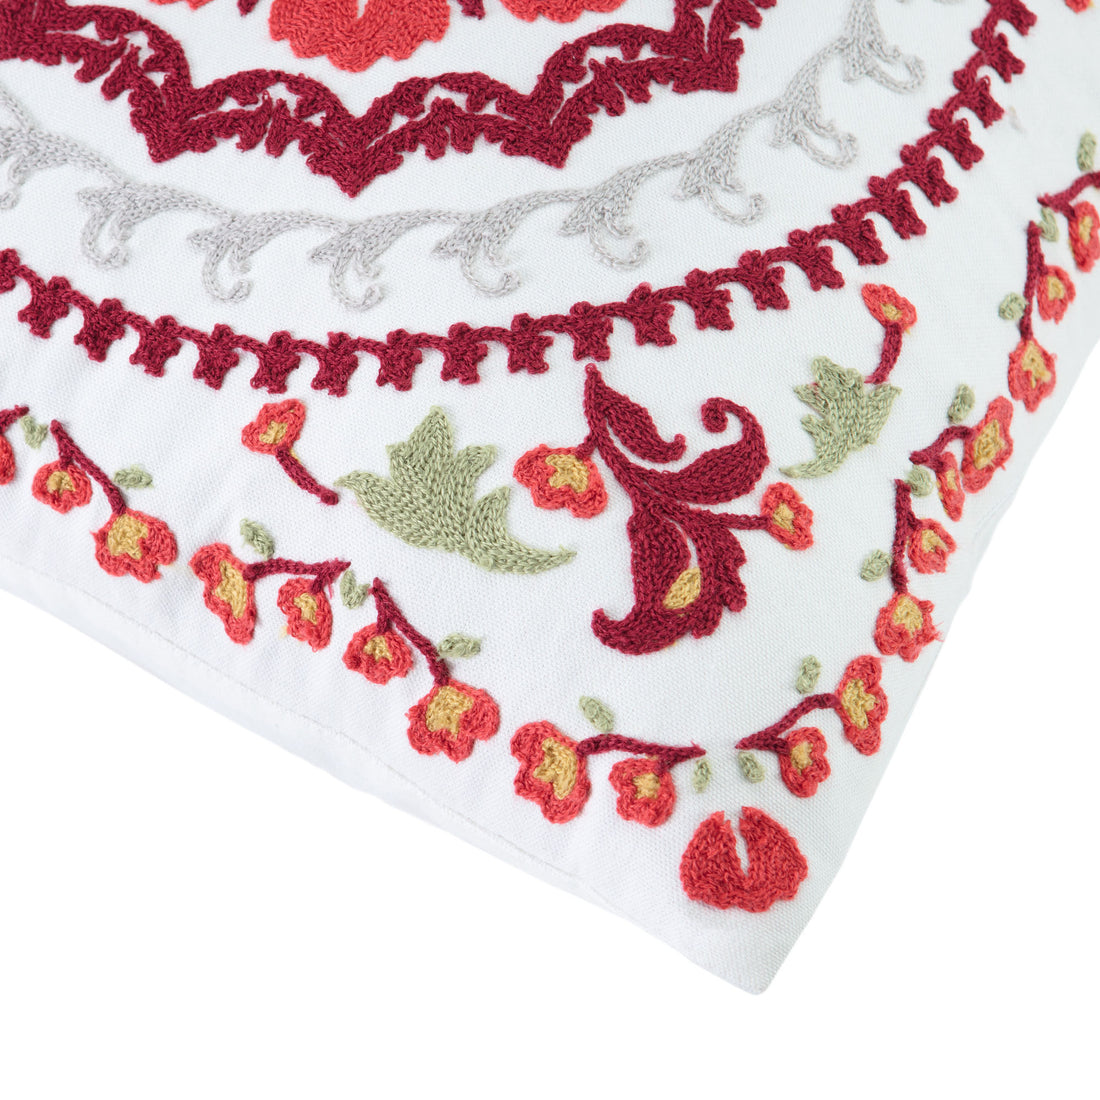 Zinna Embroidered Throw Pillow Covers